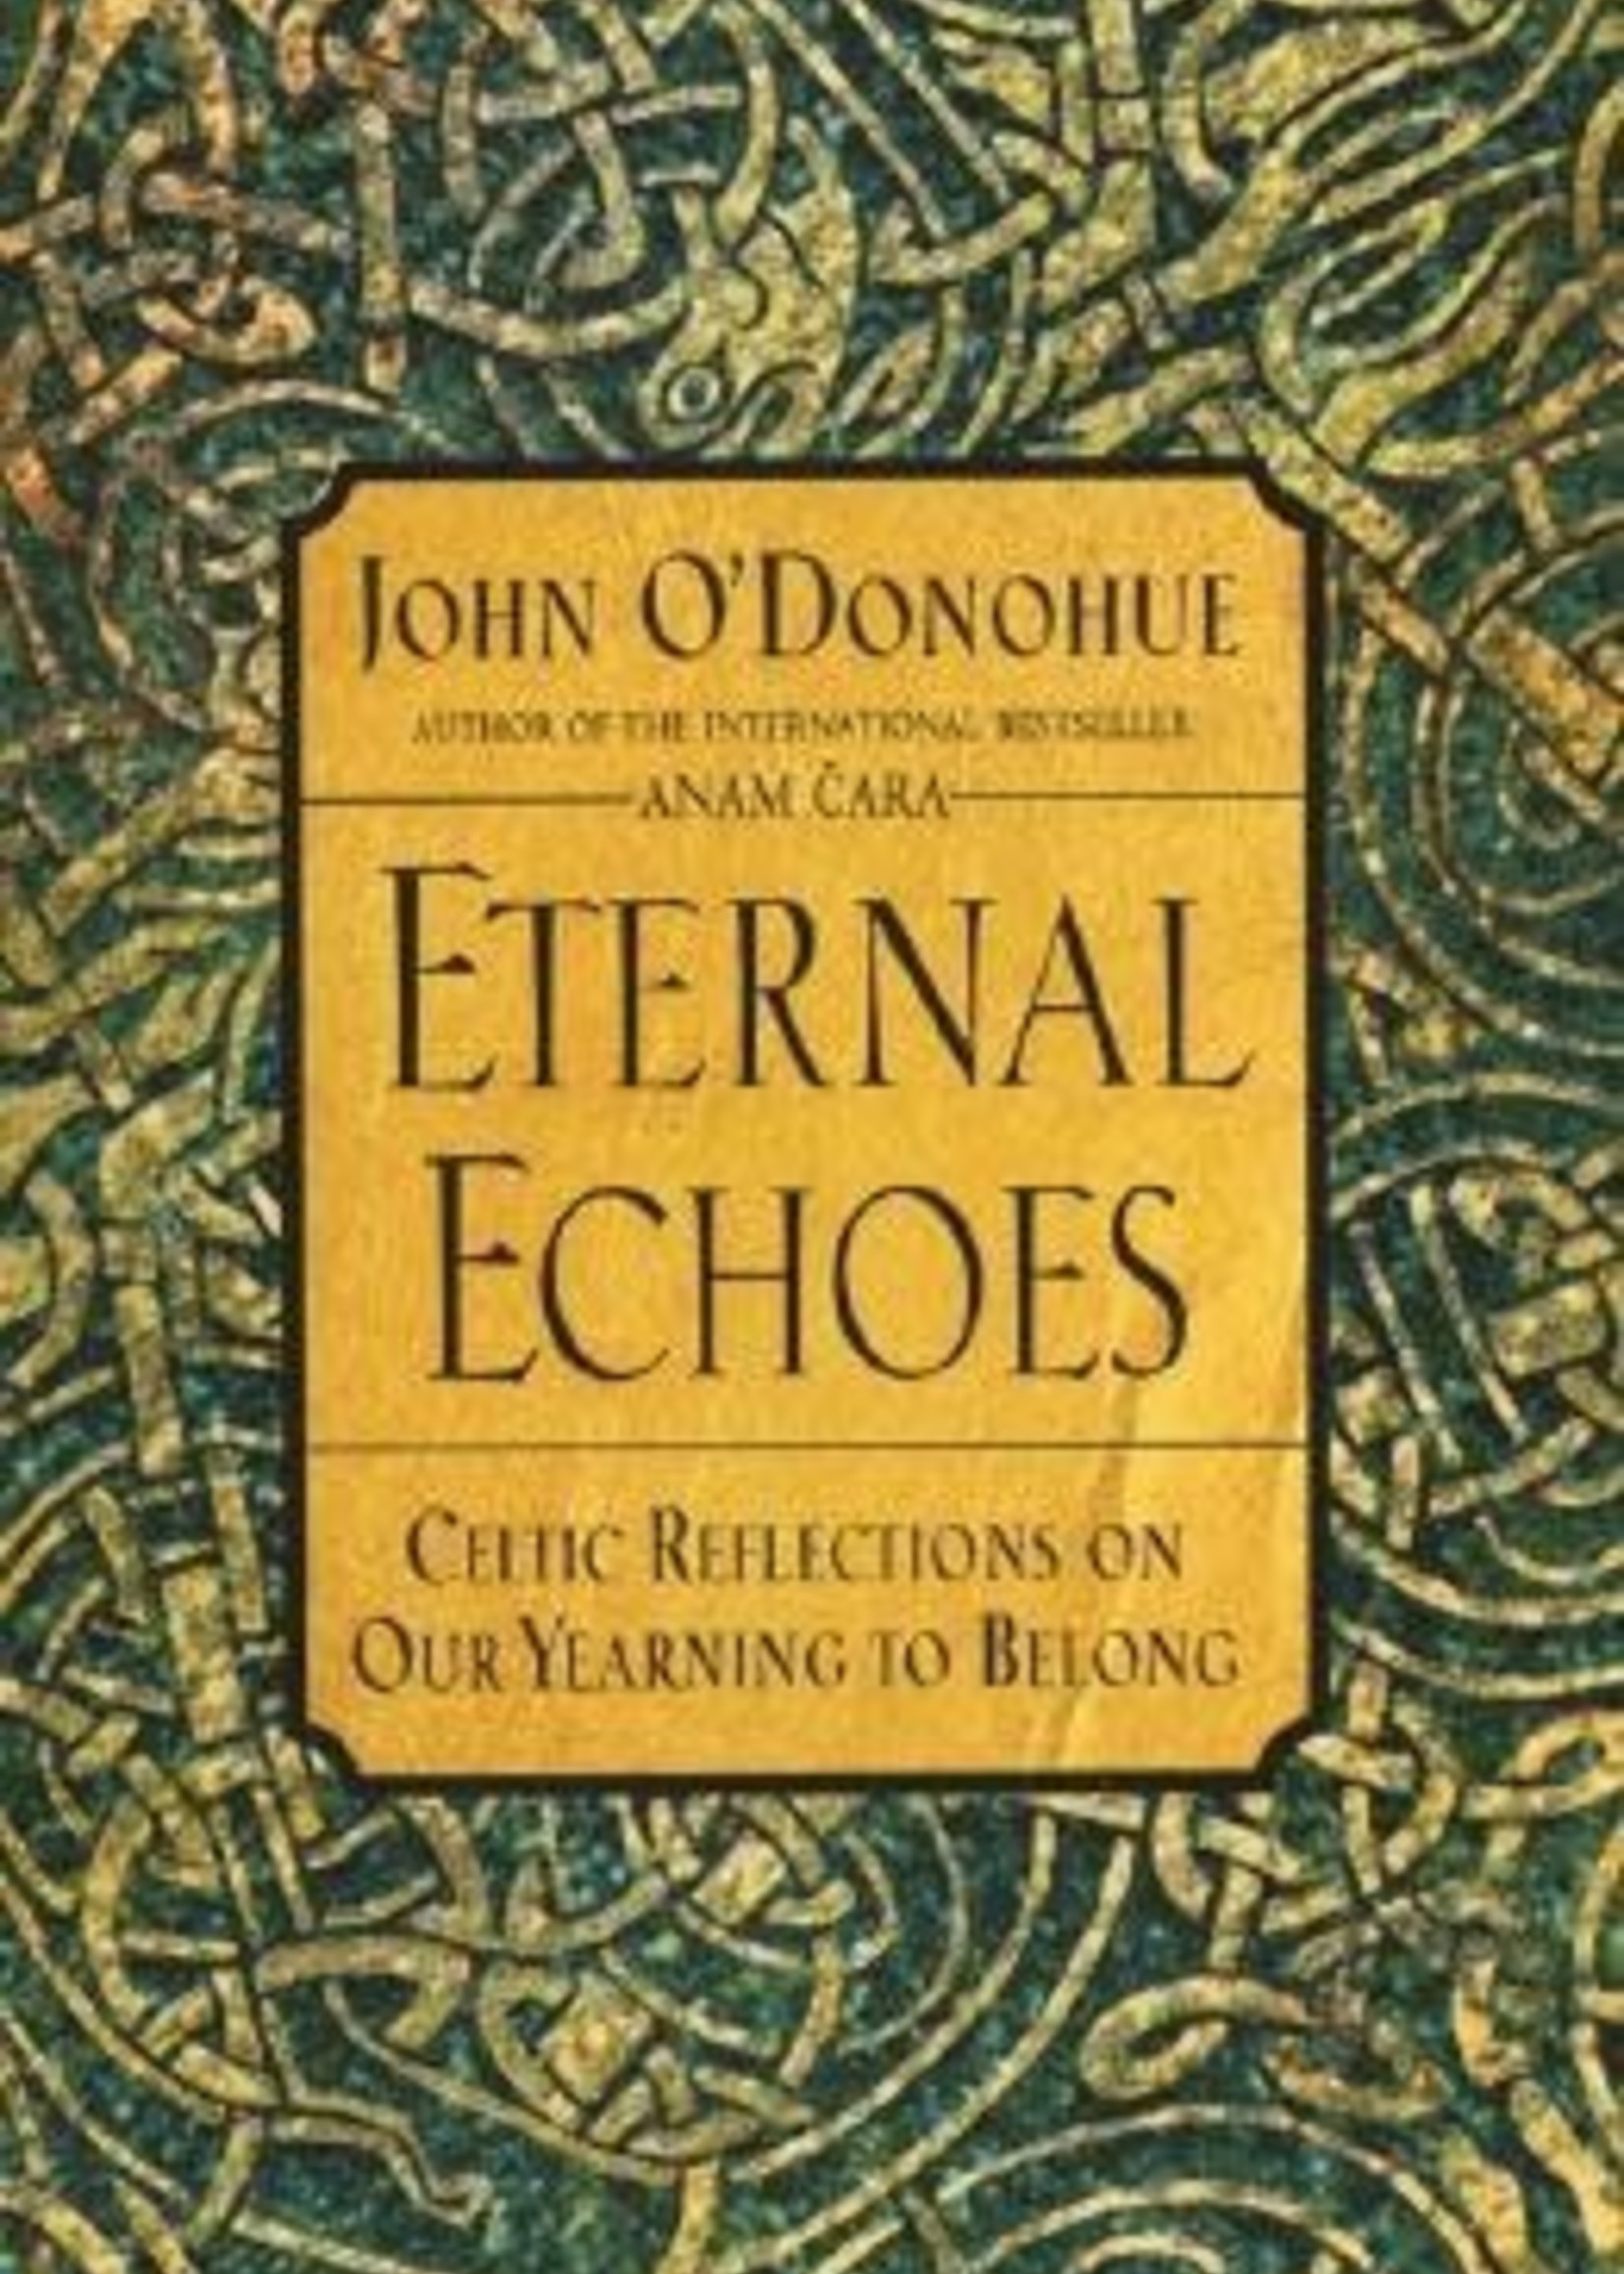 Eternal Echoes: Celtic Reflections on Our Yearning to Belong by John O'Donohue